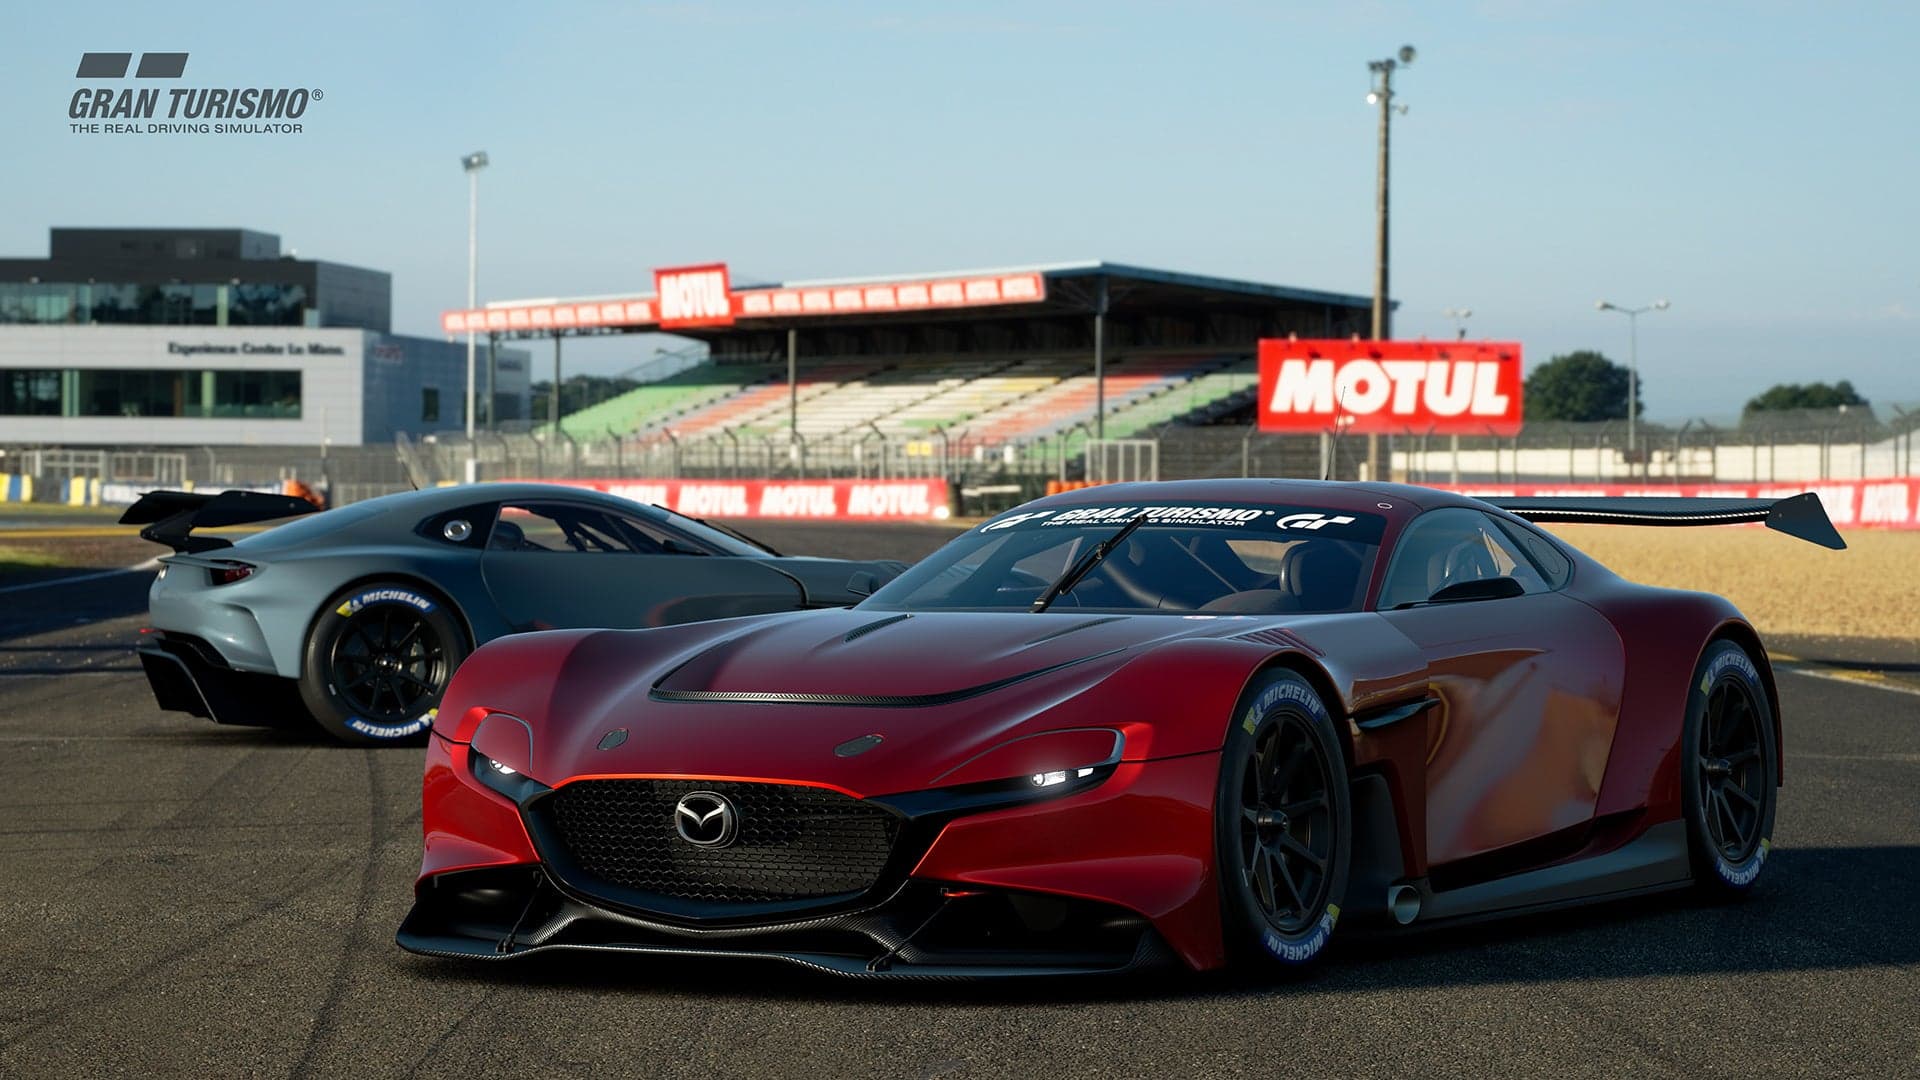 Gran Turismo 7‘s Wildly Unpopular Update Reflects the World That Created It